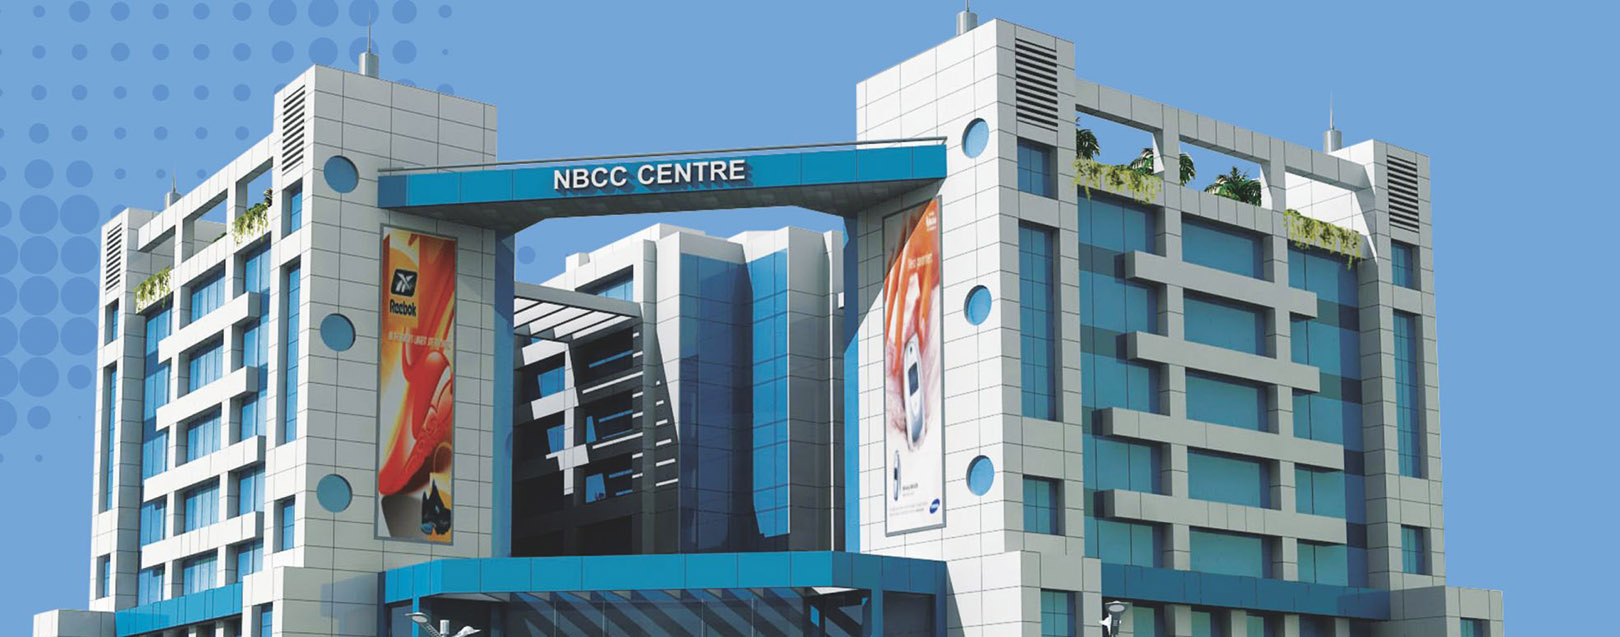 NBCC to build Supreme Court building in Mauritius